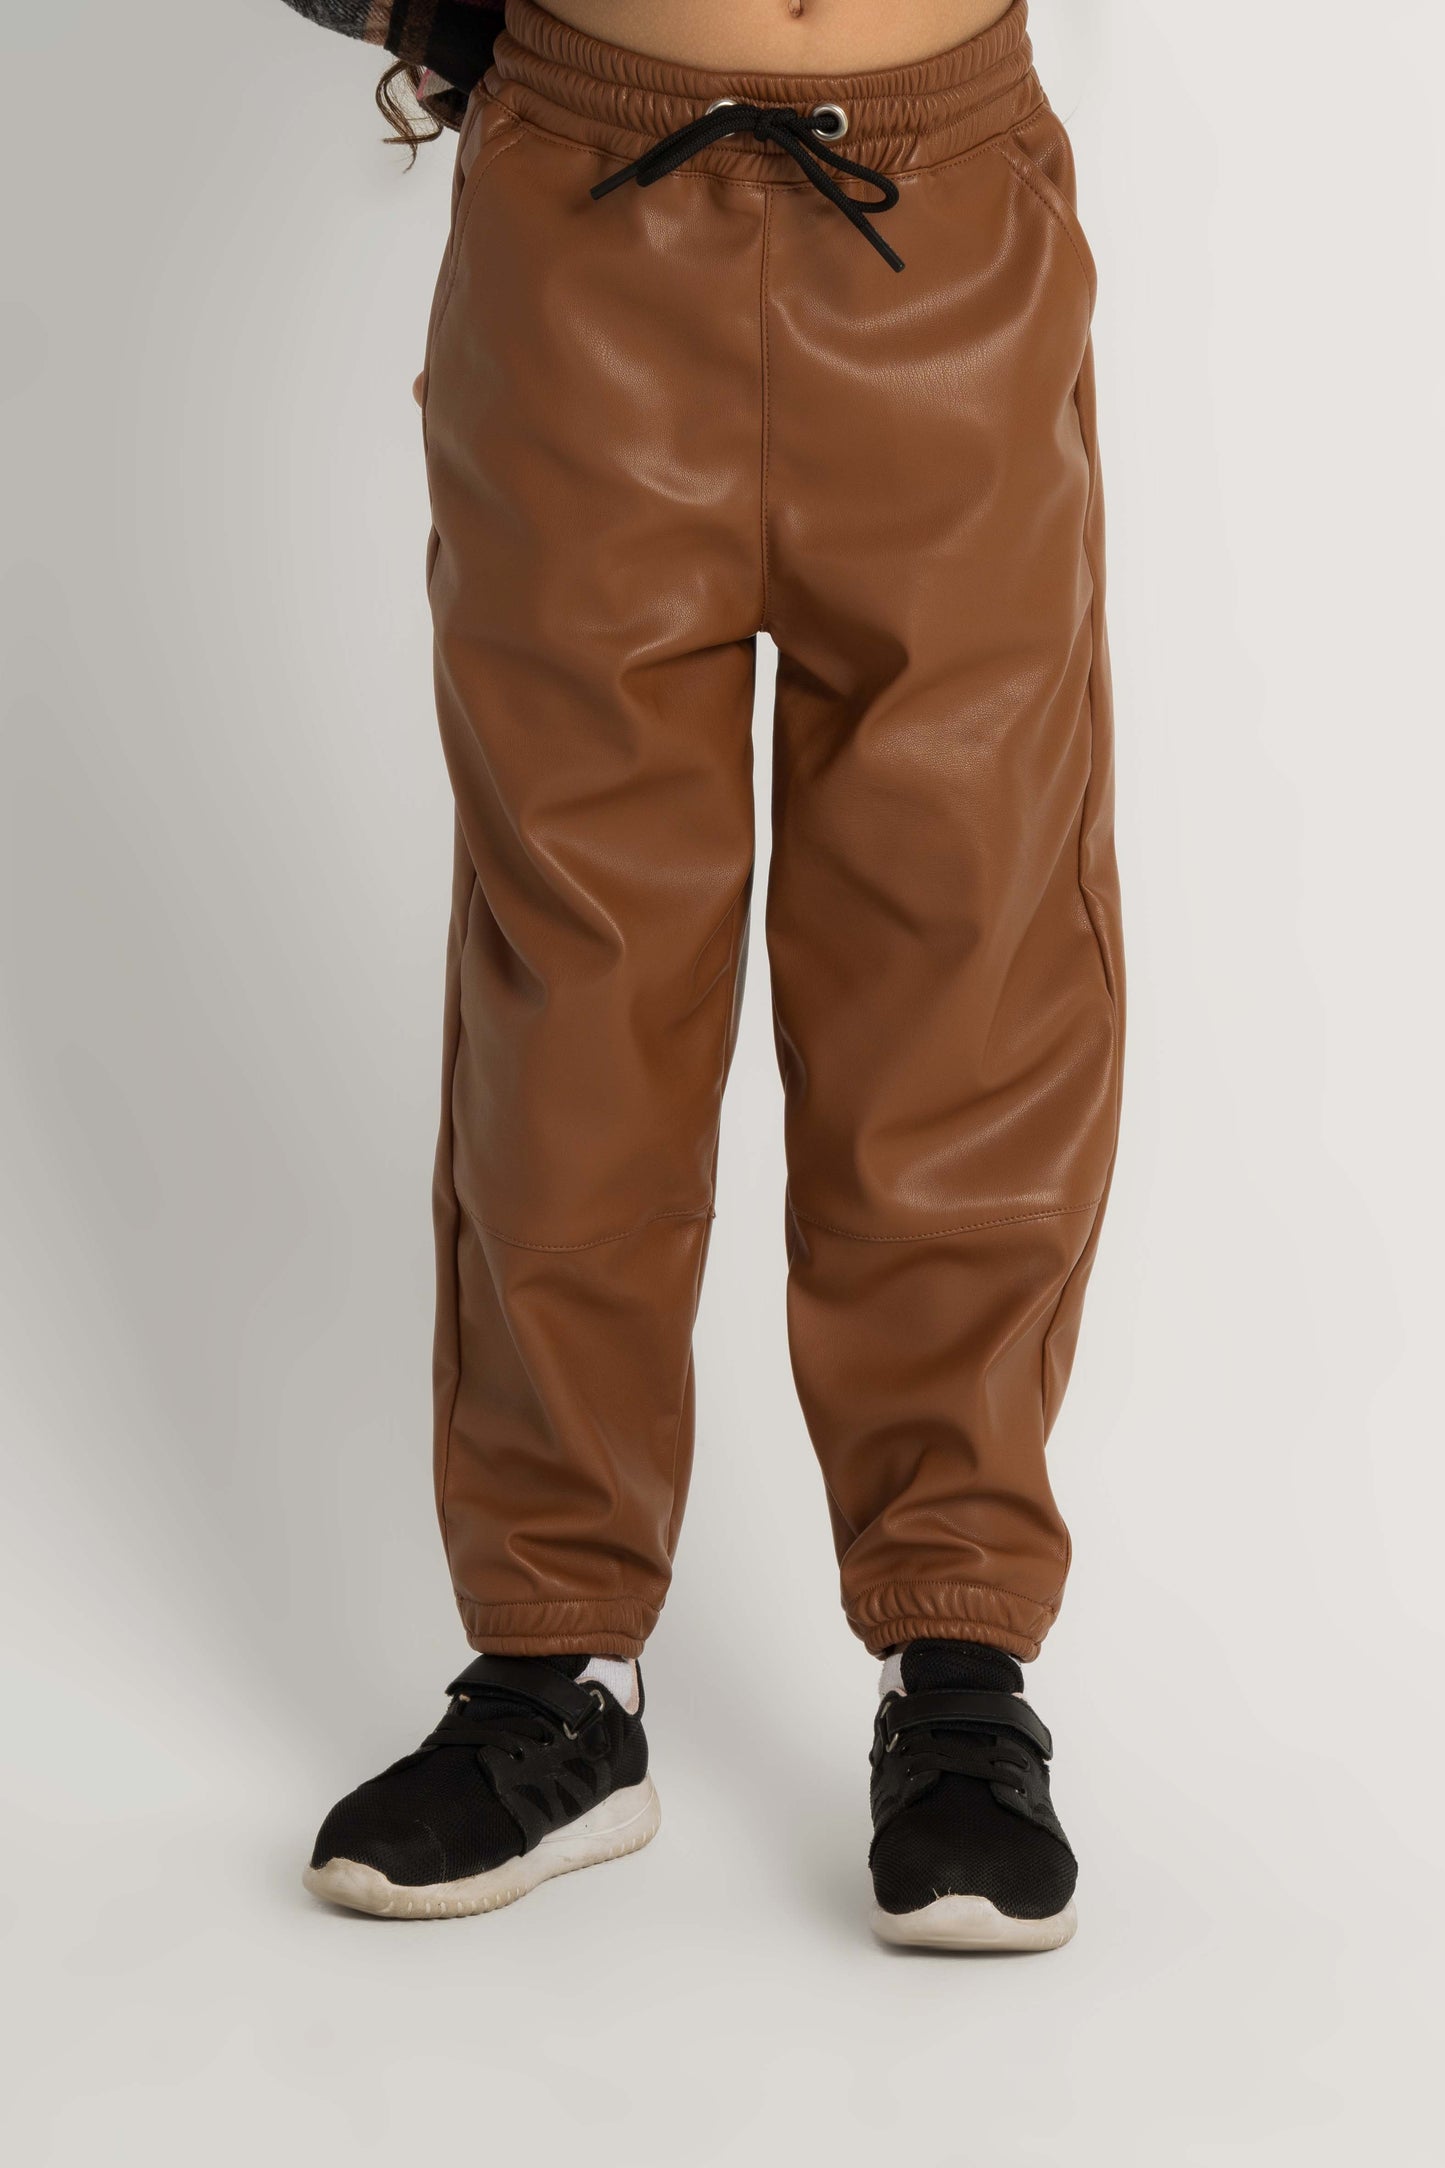 Mom fit leather pants